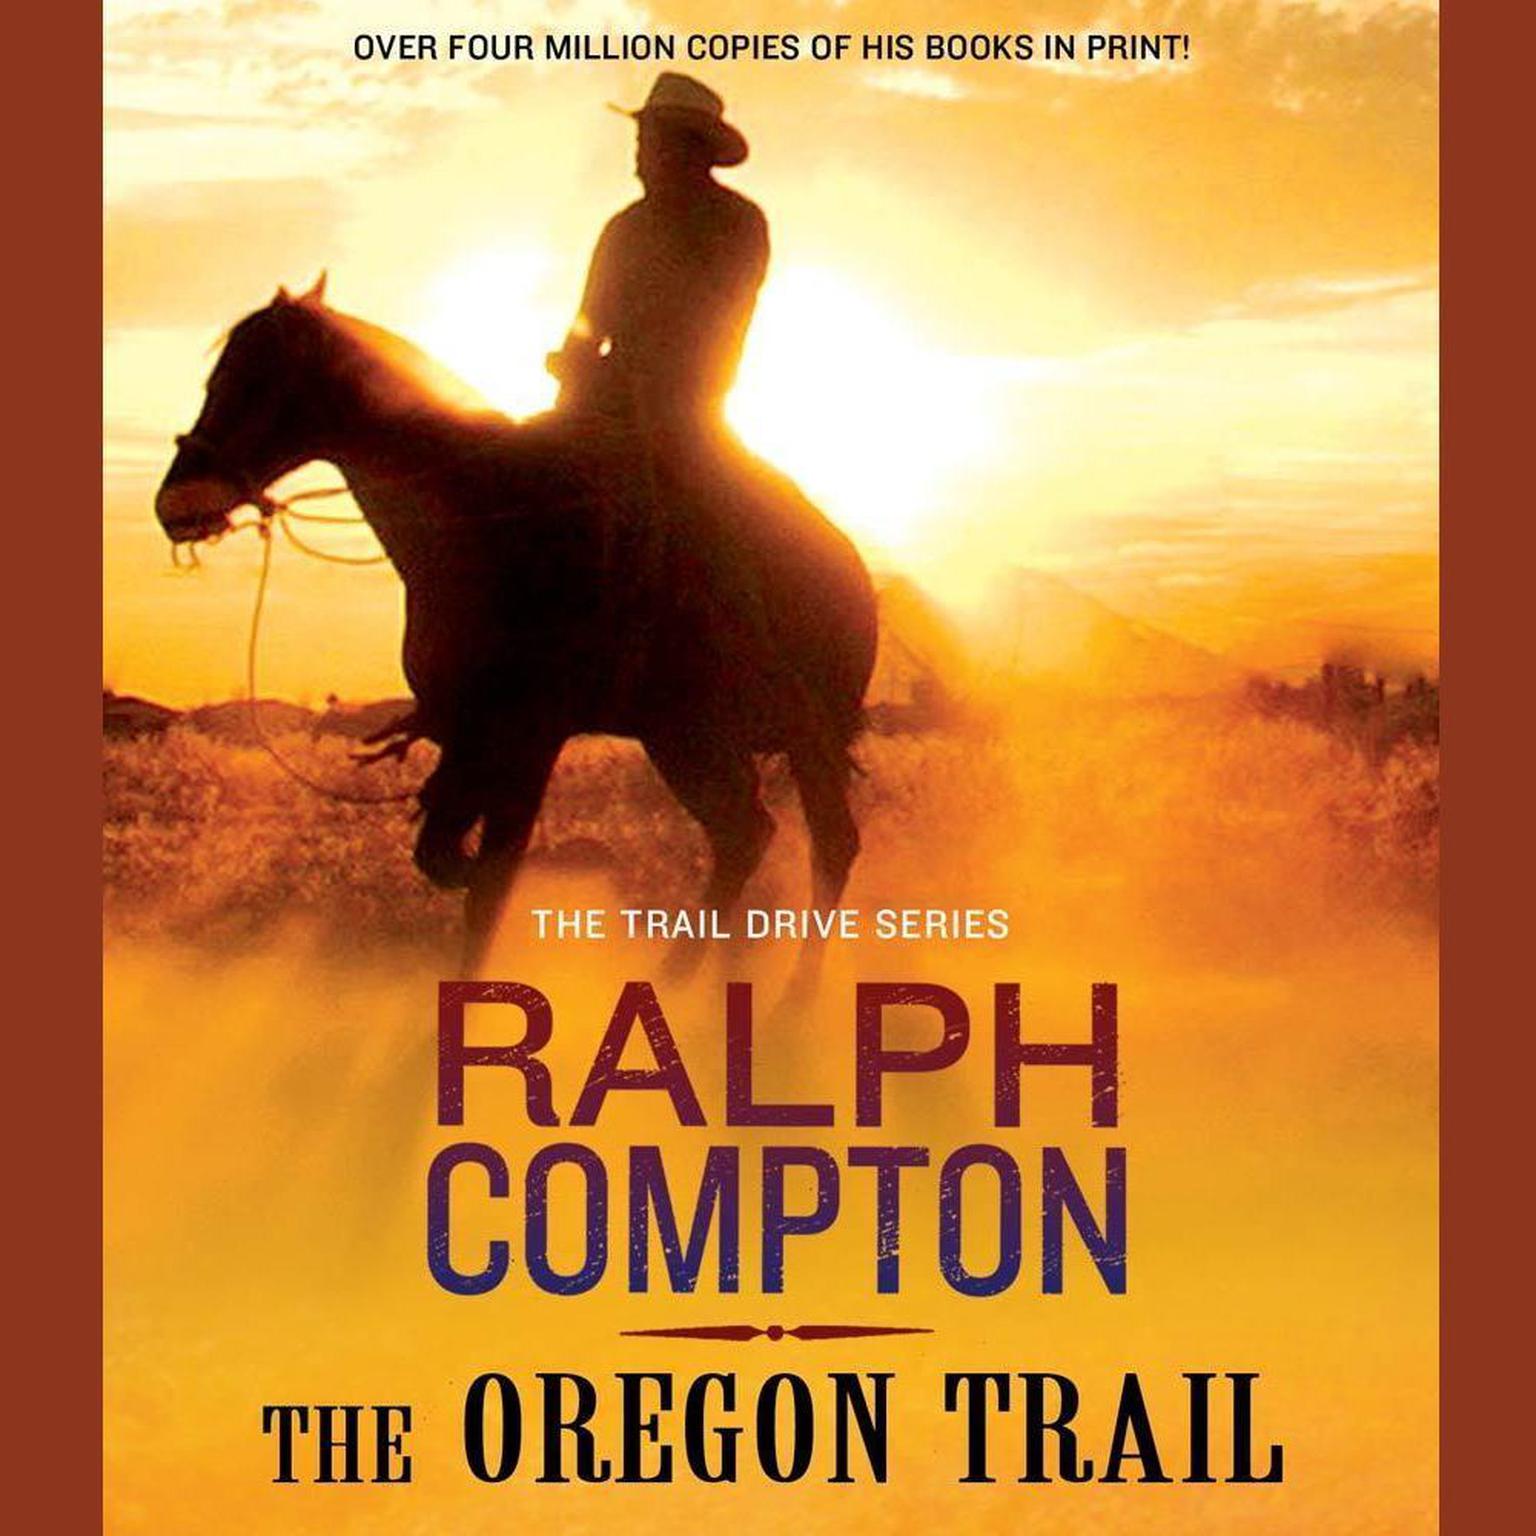 The Oregon Trail (Abridged): The Trail Drive, Book 9 Audiobook, by Ralph Compton